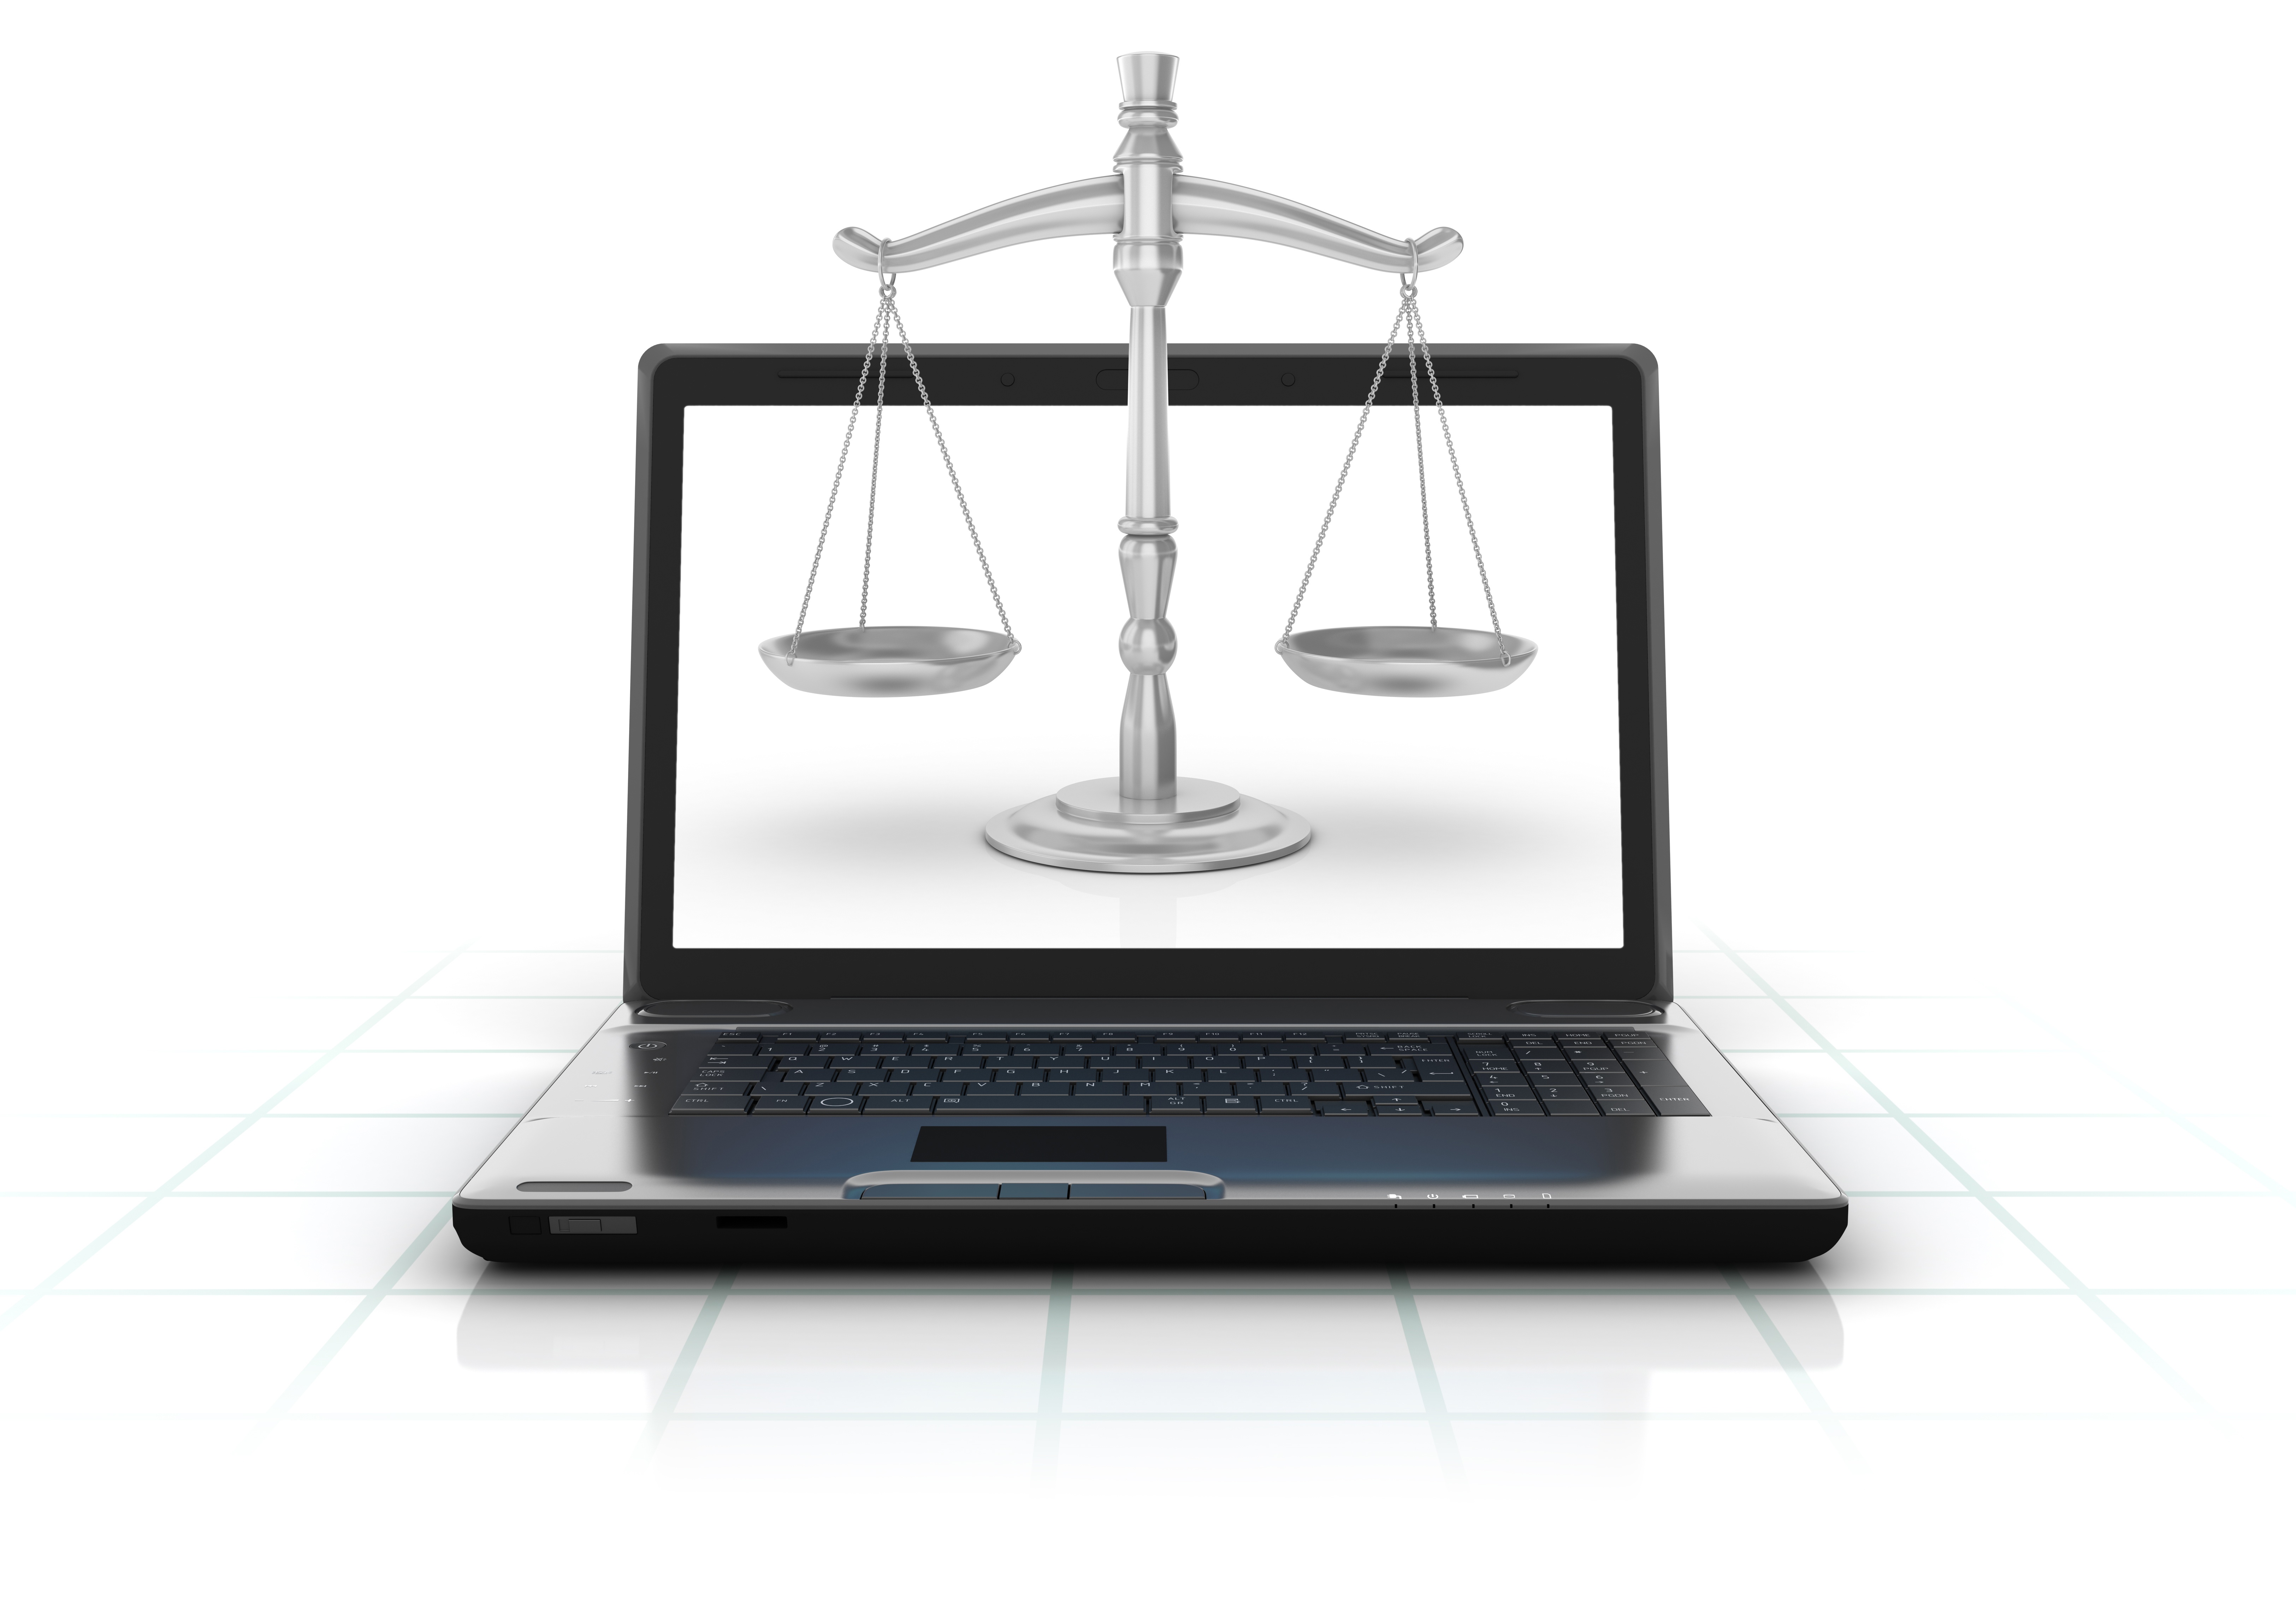 ADA Website Compliance Lawsuits: What to Do After a Demand Letter